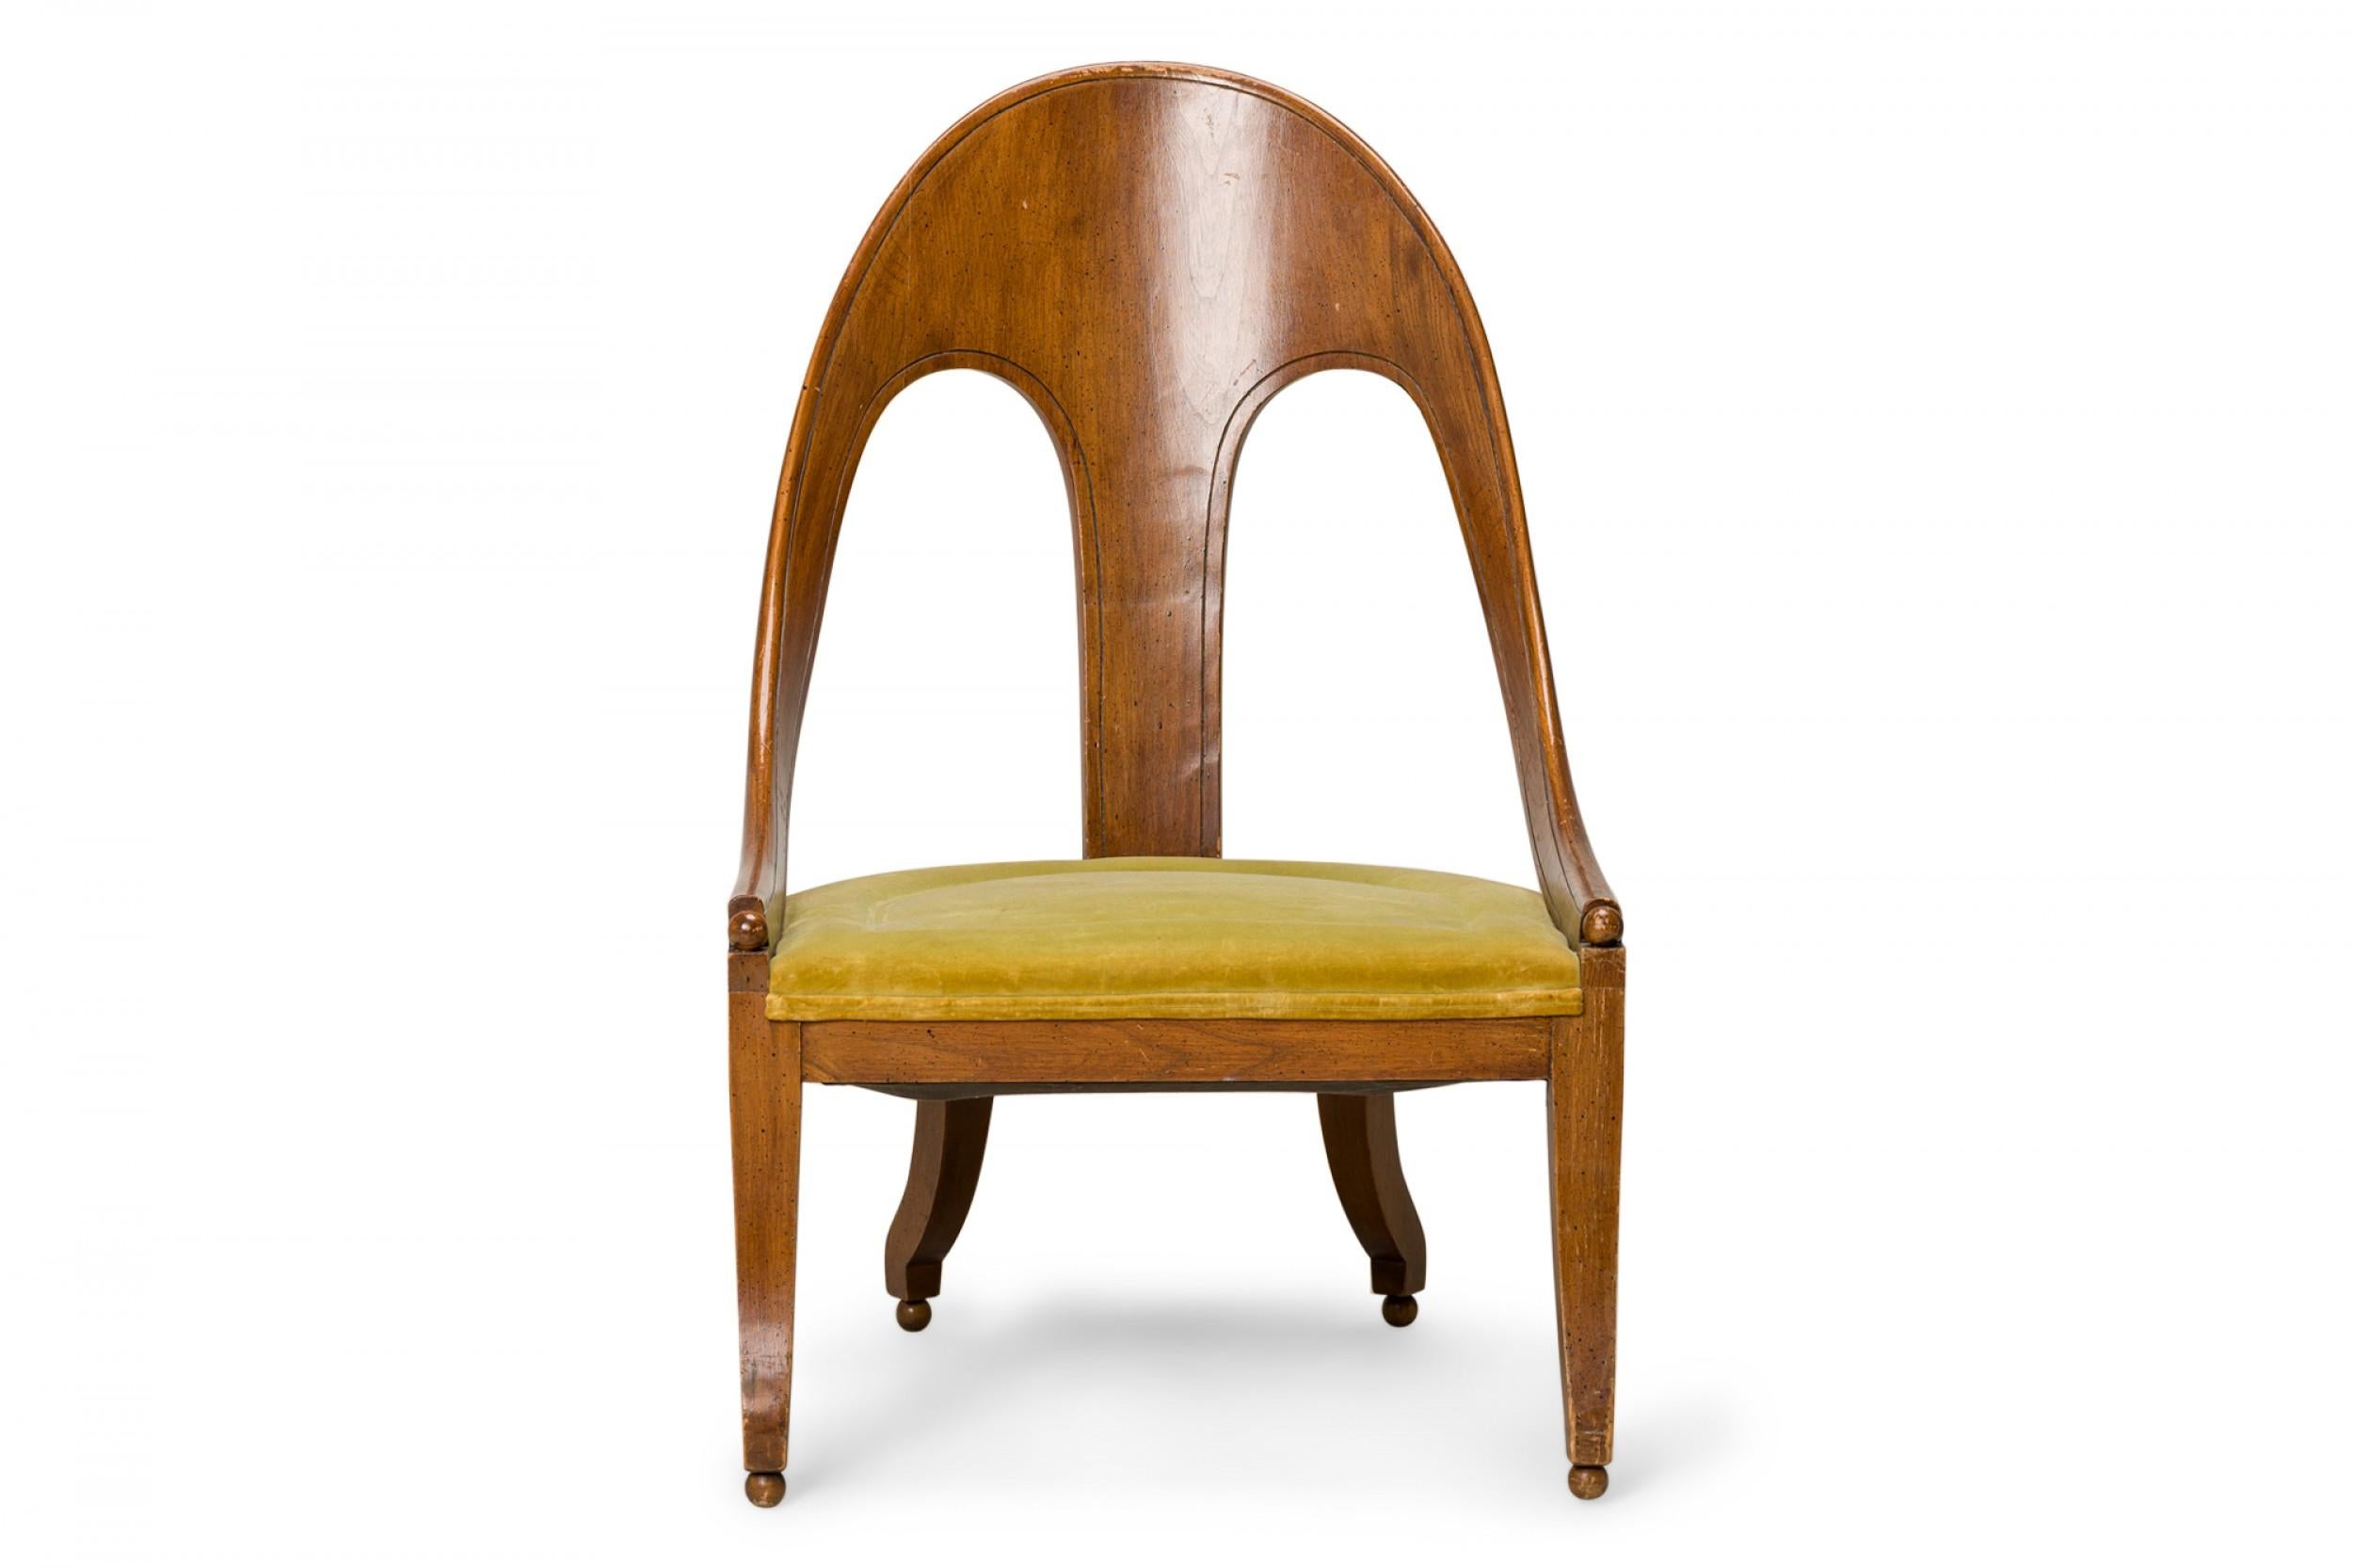 American Mid-Century spoon back side / pull up chair with a walnut frame and green velvet upholstered seat, resting on four square curved legs ending in ball feet. (Similar pieces: DUF0427-DUF0431)